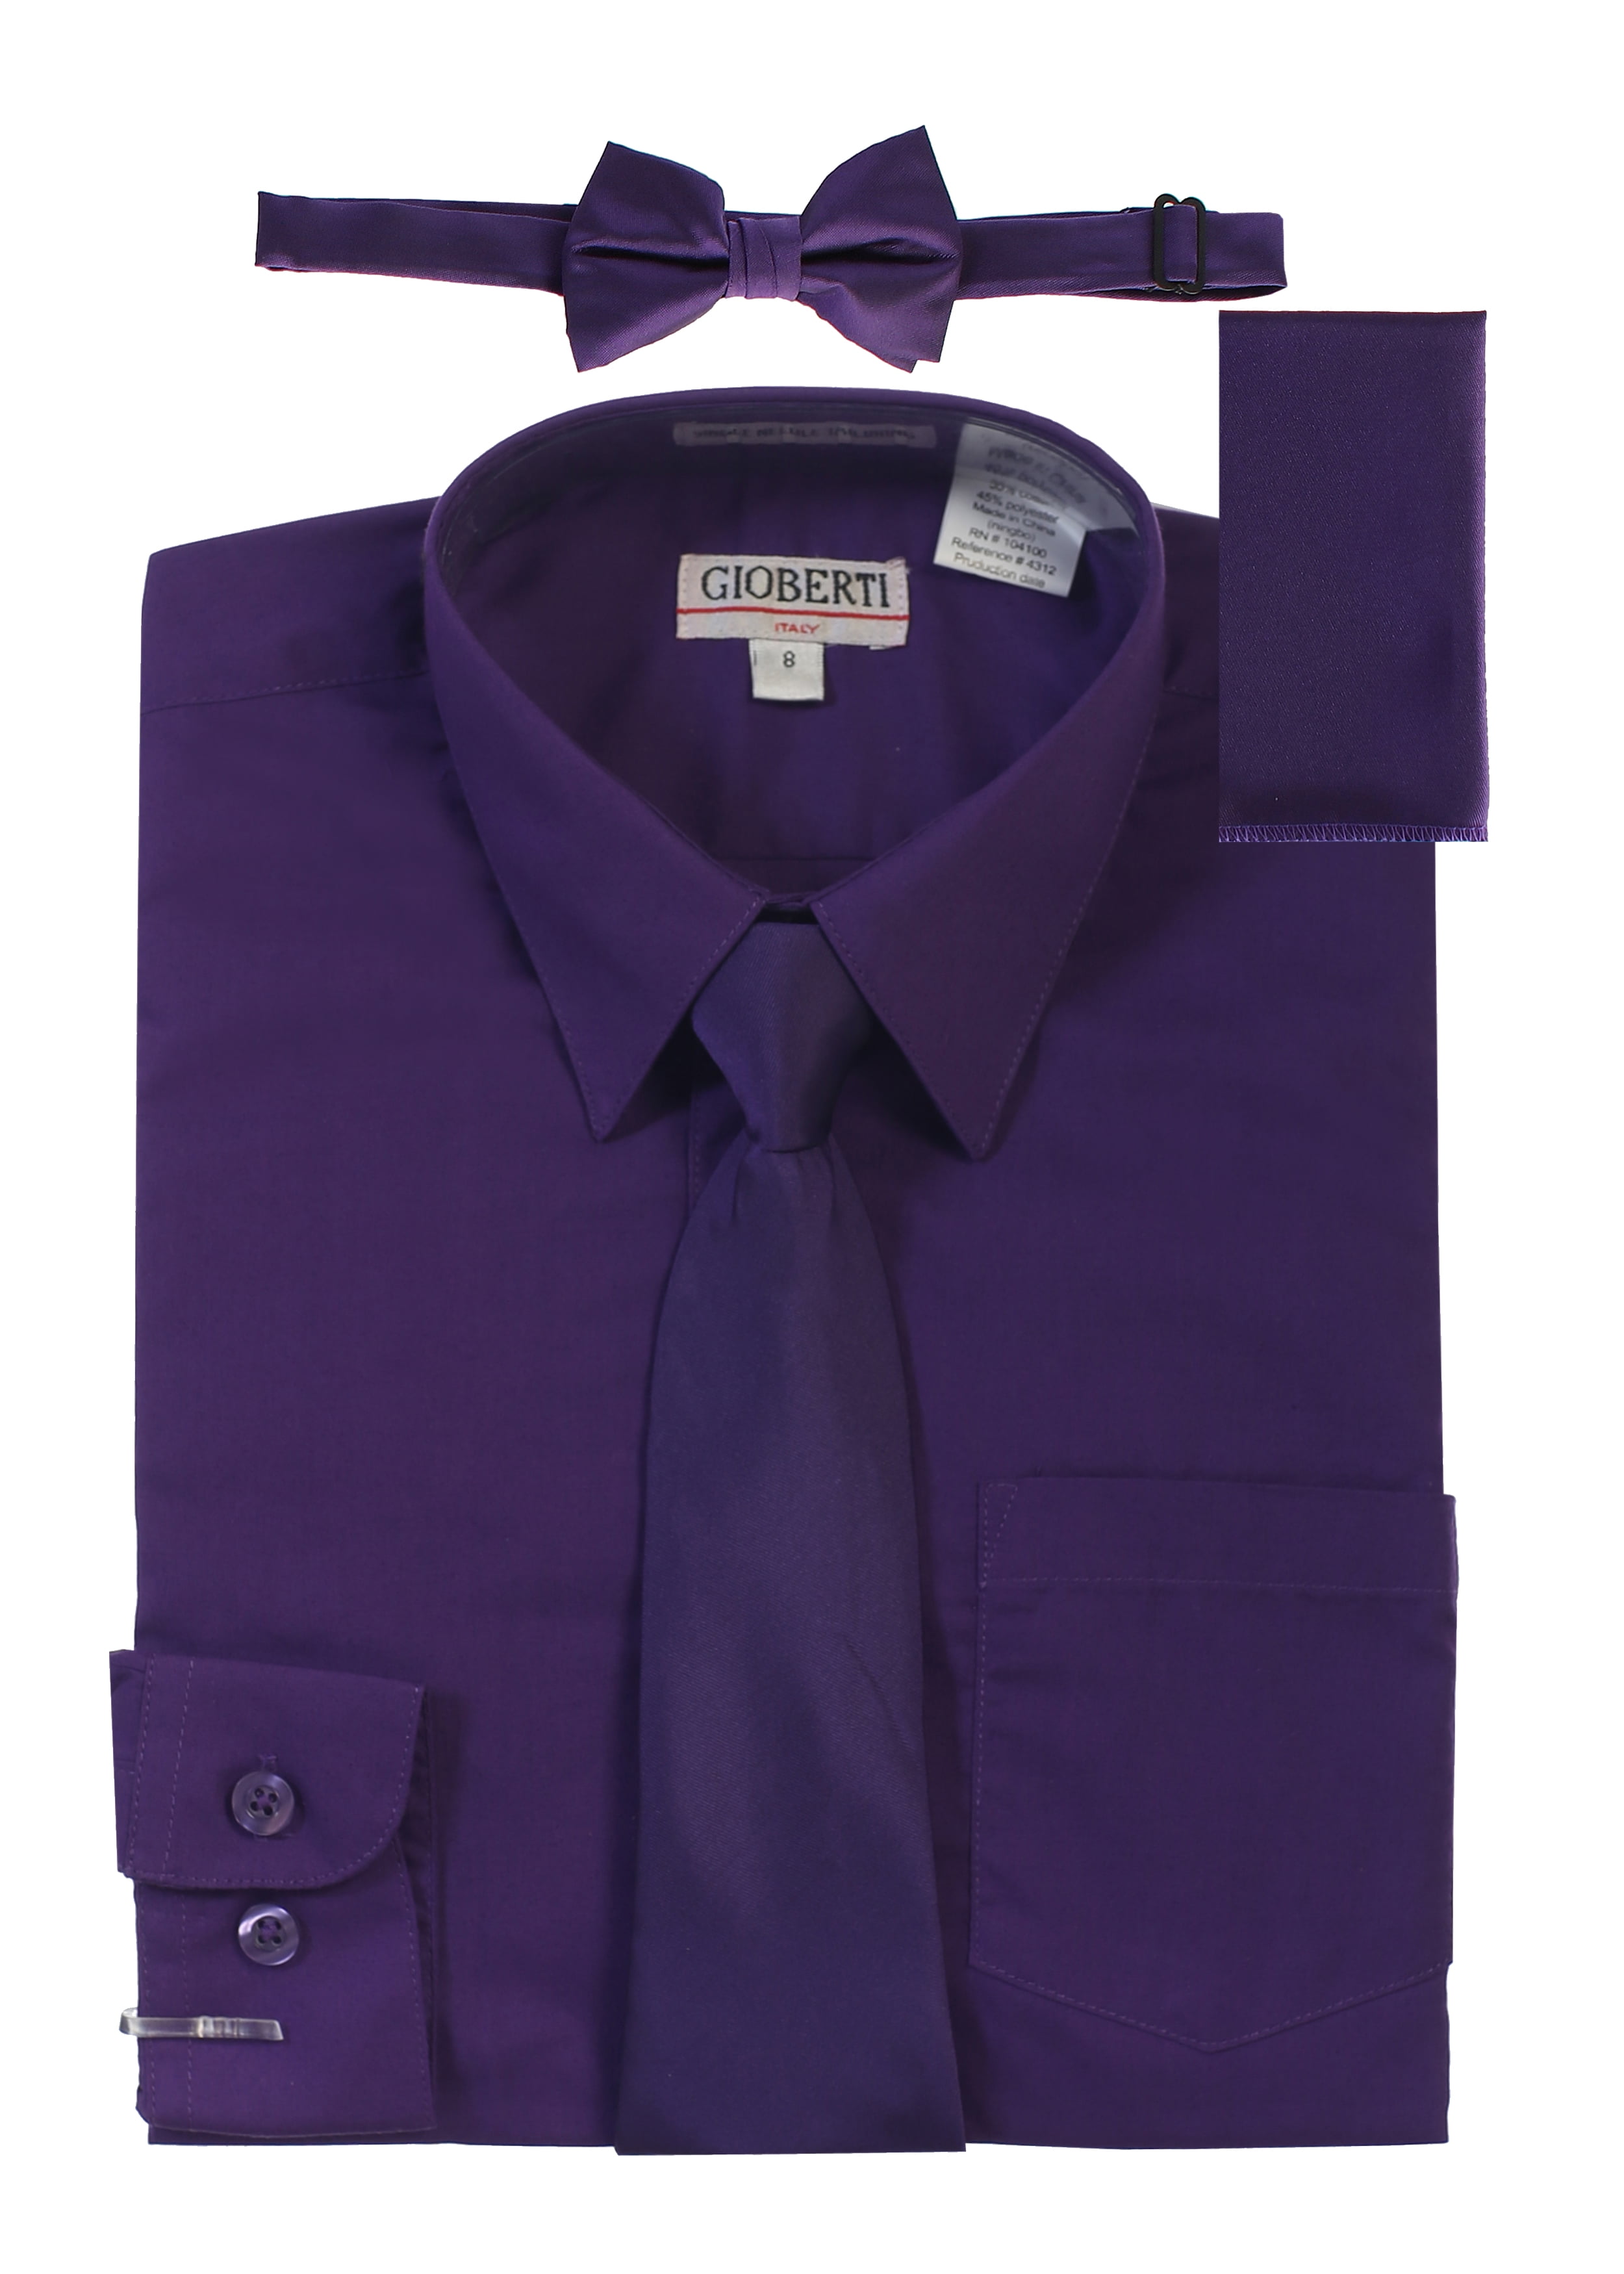 Toddler Lilac Dress Shirt with Matching Tie & Hankie Long Sleeves Sizes 2T,3T,4T 